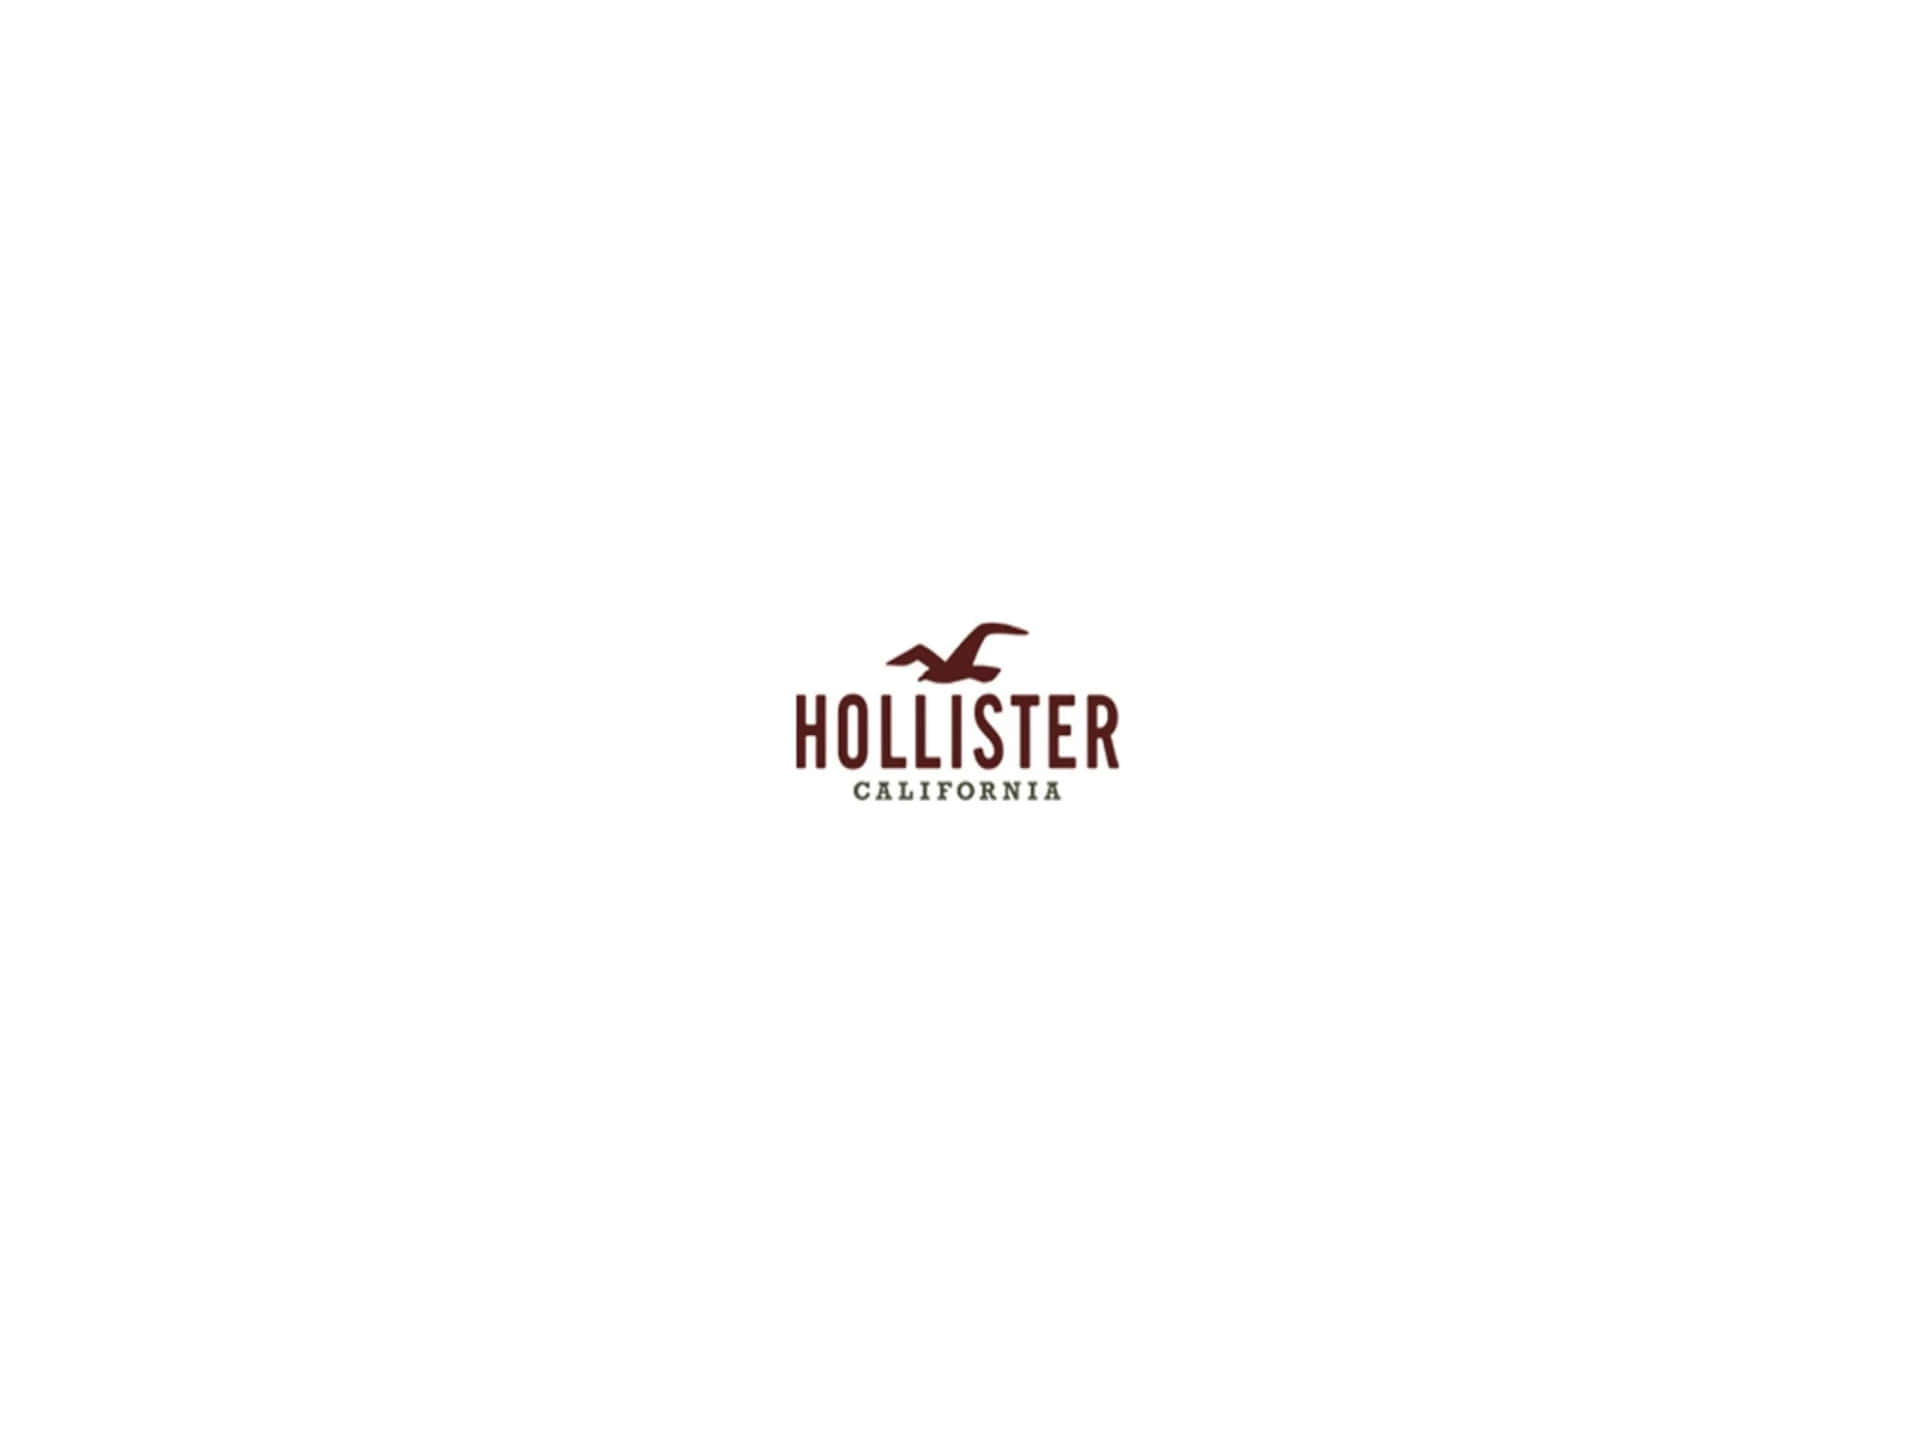 "Come In, Relax and Enjoy the Hollister Experience!"